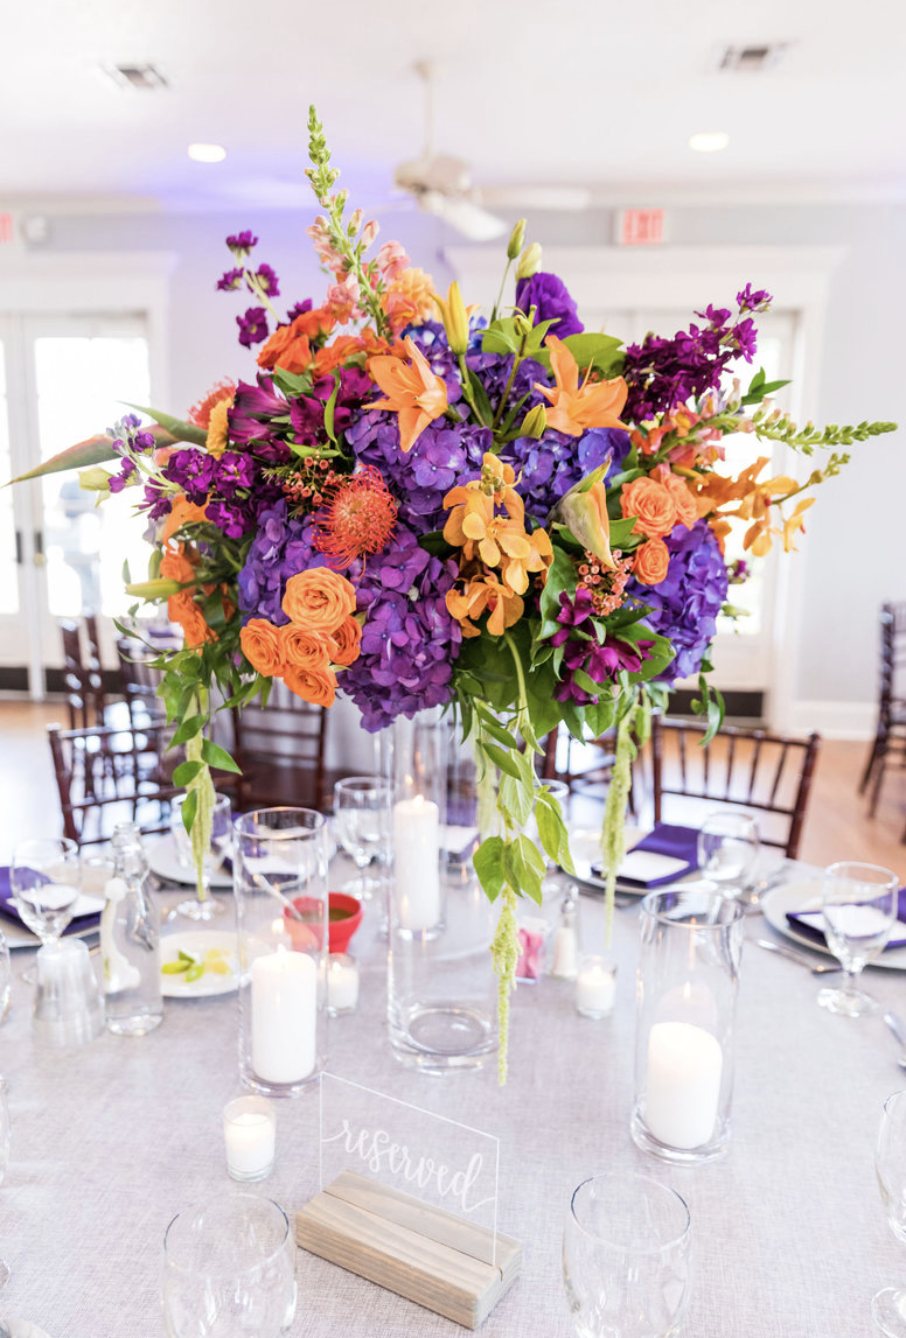 A tall and bright centerpiece of purple, orange and green flowers makes the perfect summer wedding accent.